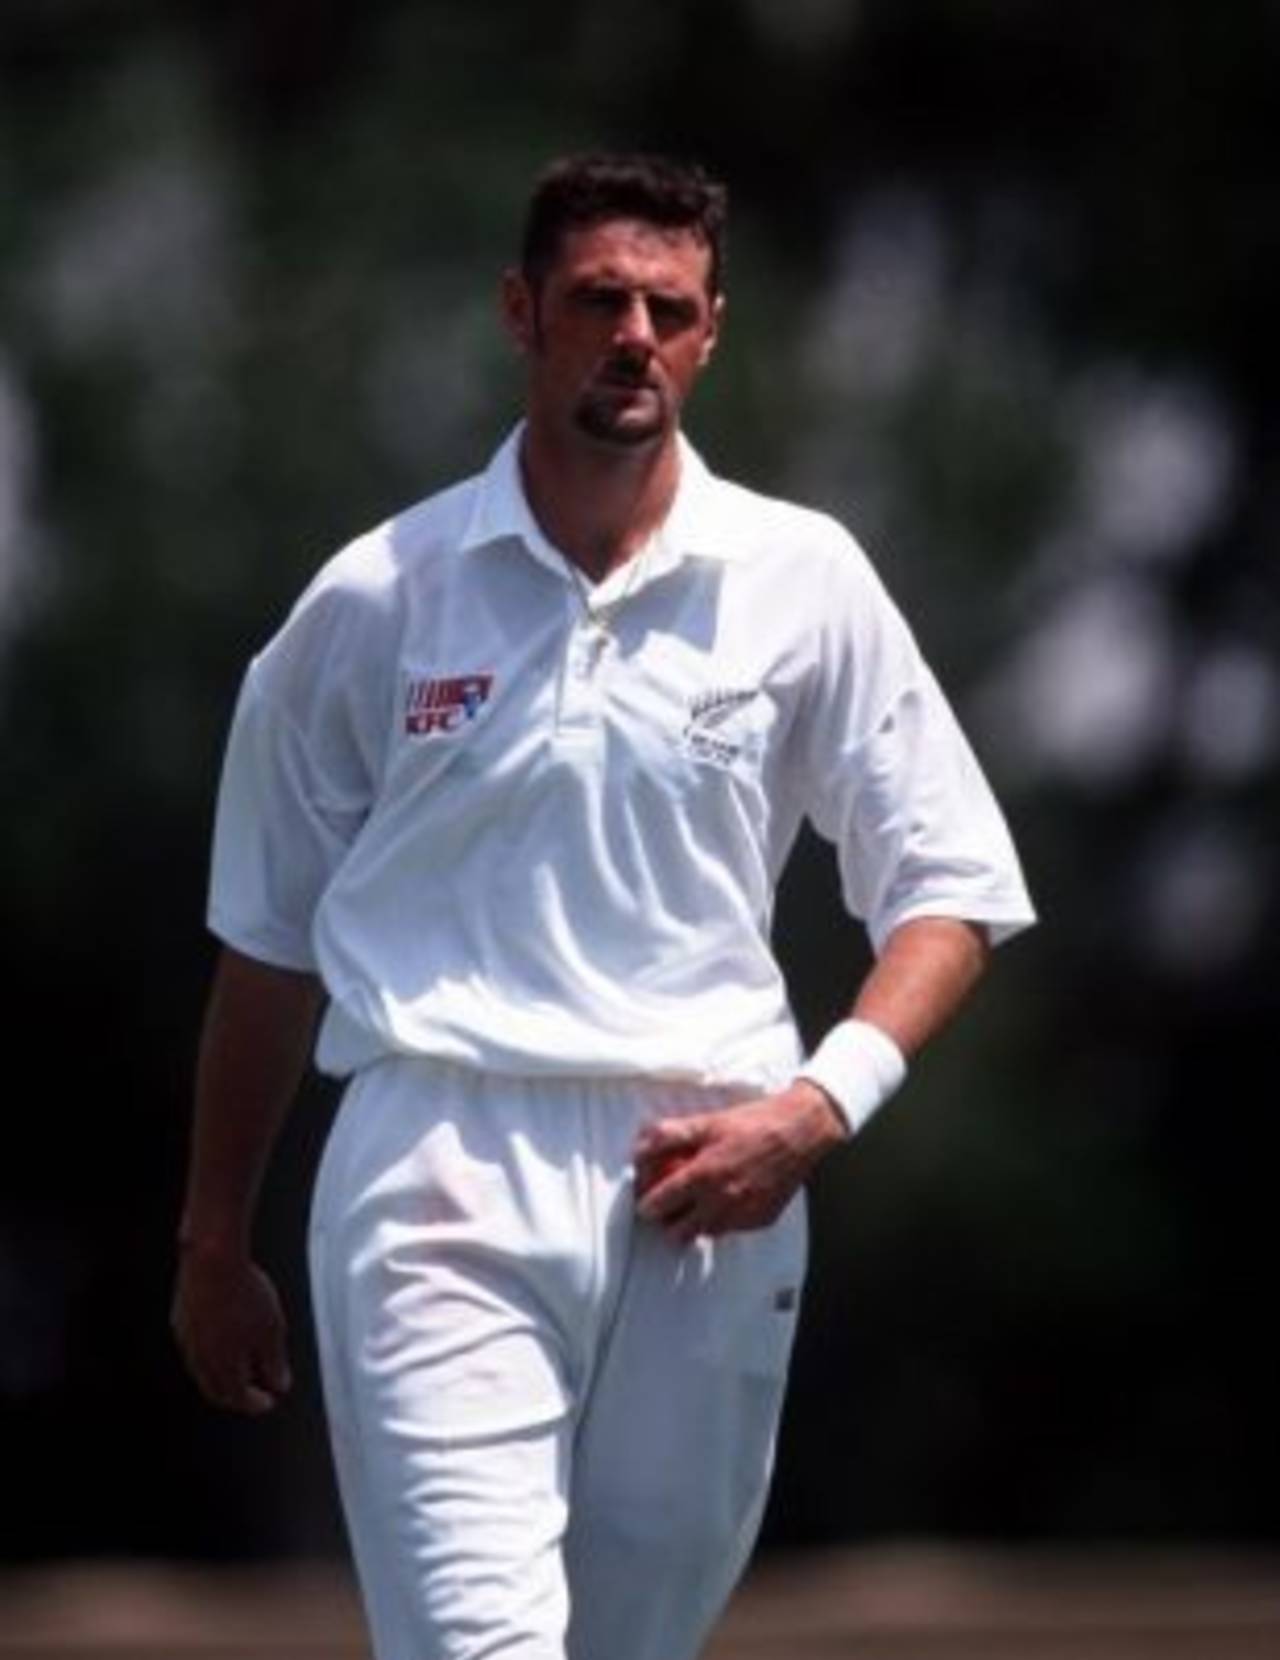 Simon Doull prepares to bowl, Queensland v New Zealand, Cairns, 22 October, 1997